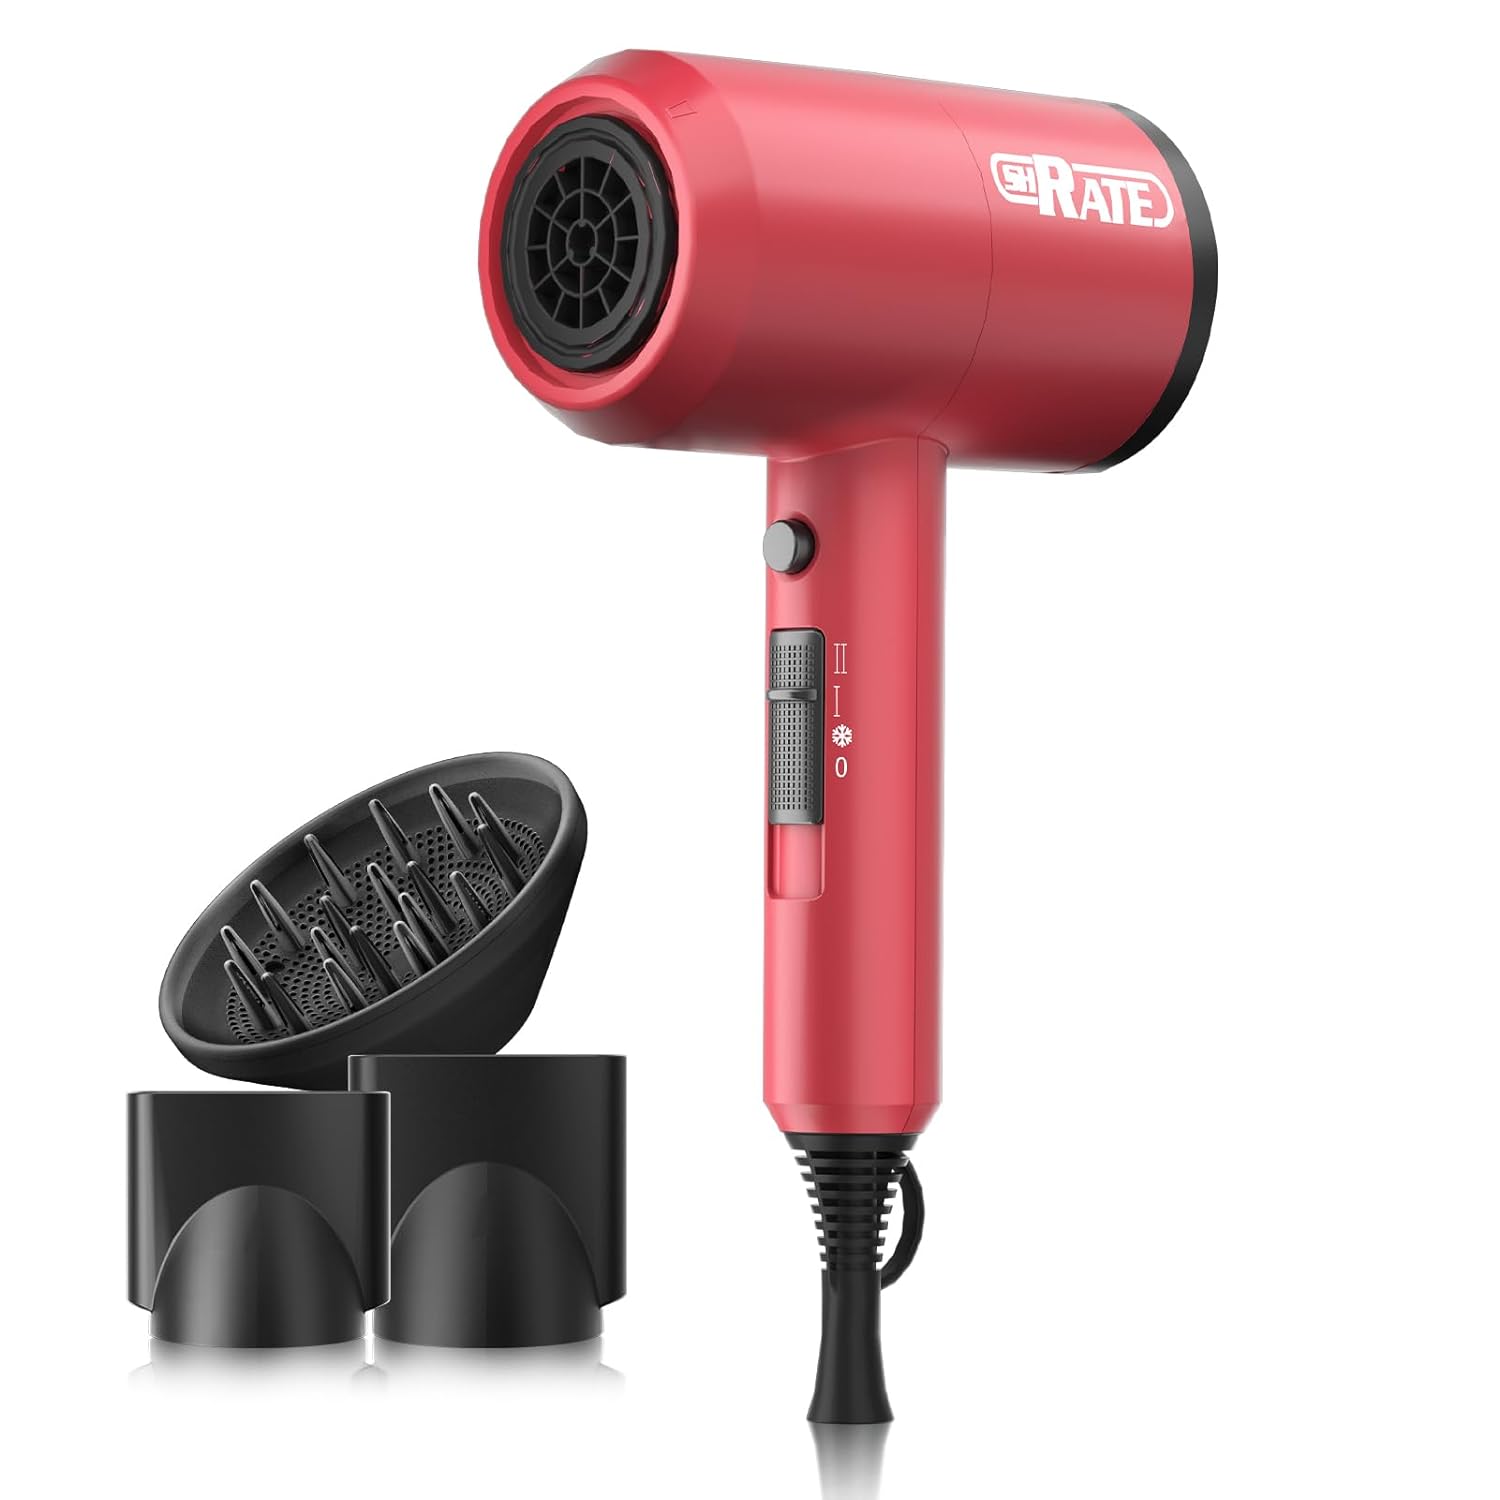 SHRATE Ionic Hair Dryer, Professional Salon Negative Ions Blow Dryer, Powerful 1800W for Fast Drying, 3 Heating/ 2 Speed, Cool Button, Damage Free Hair with Constant Temperature, Low Noise, Red